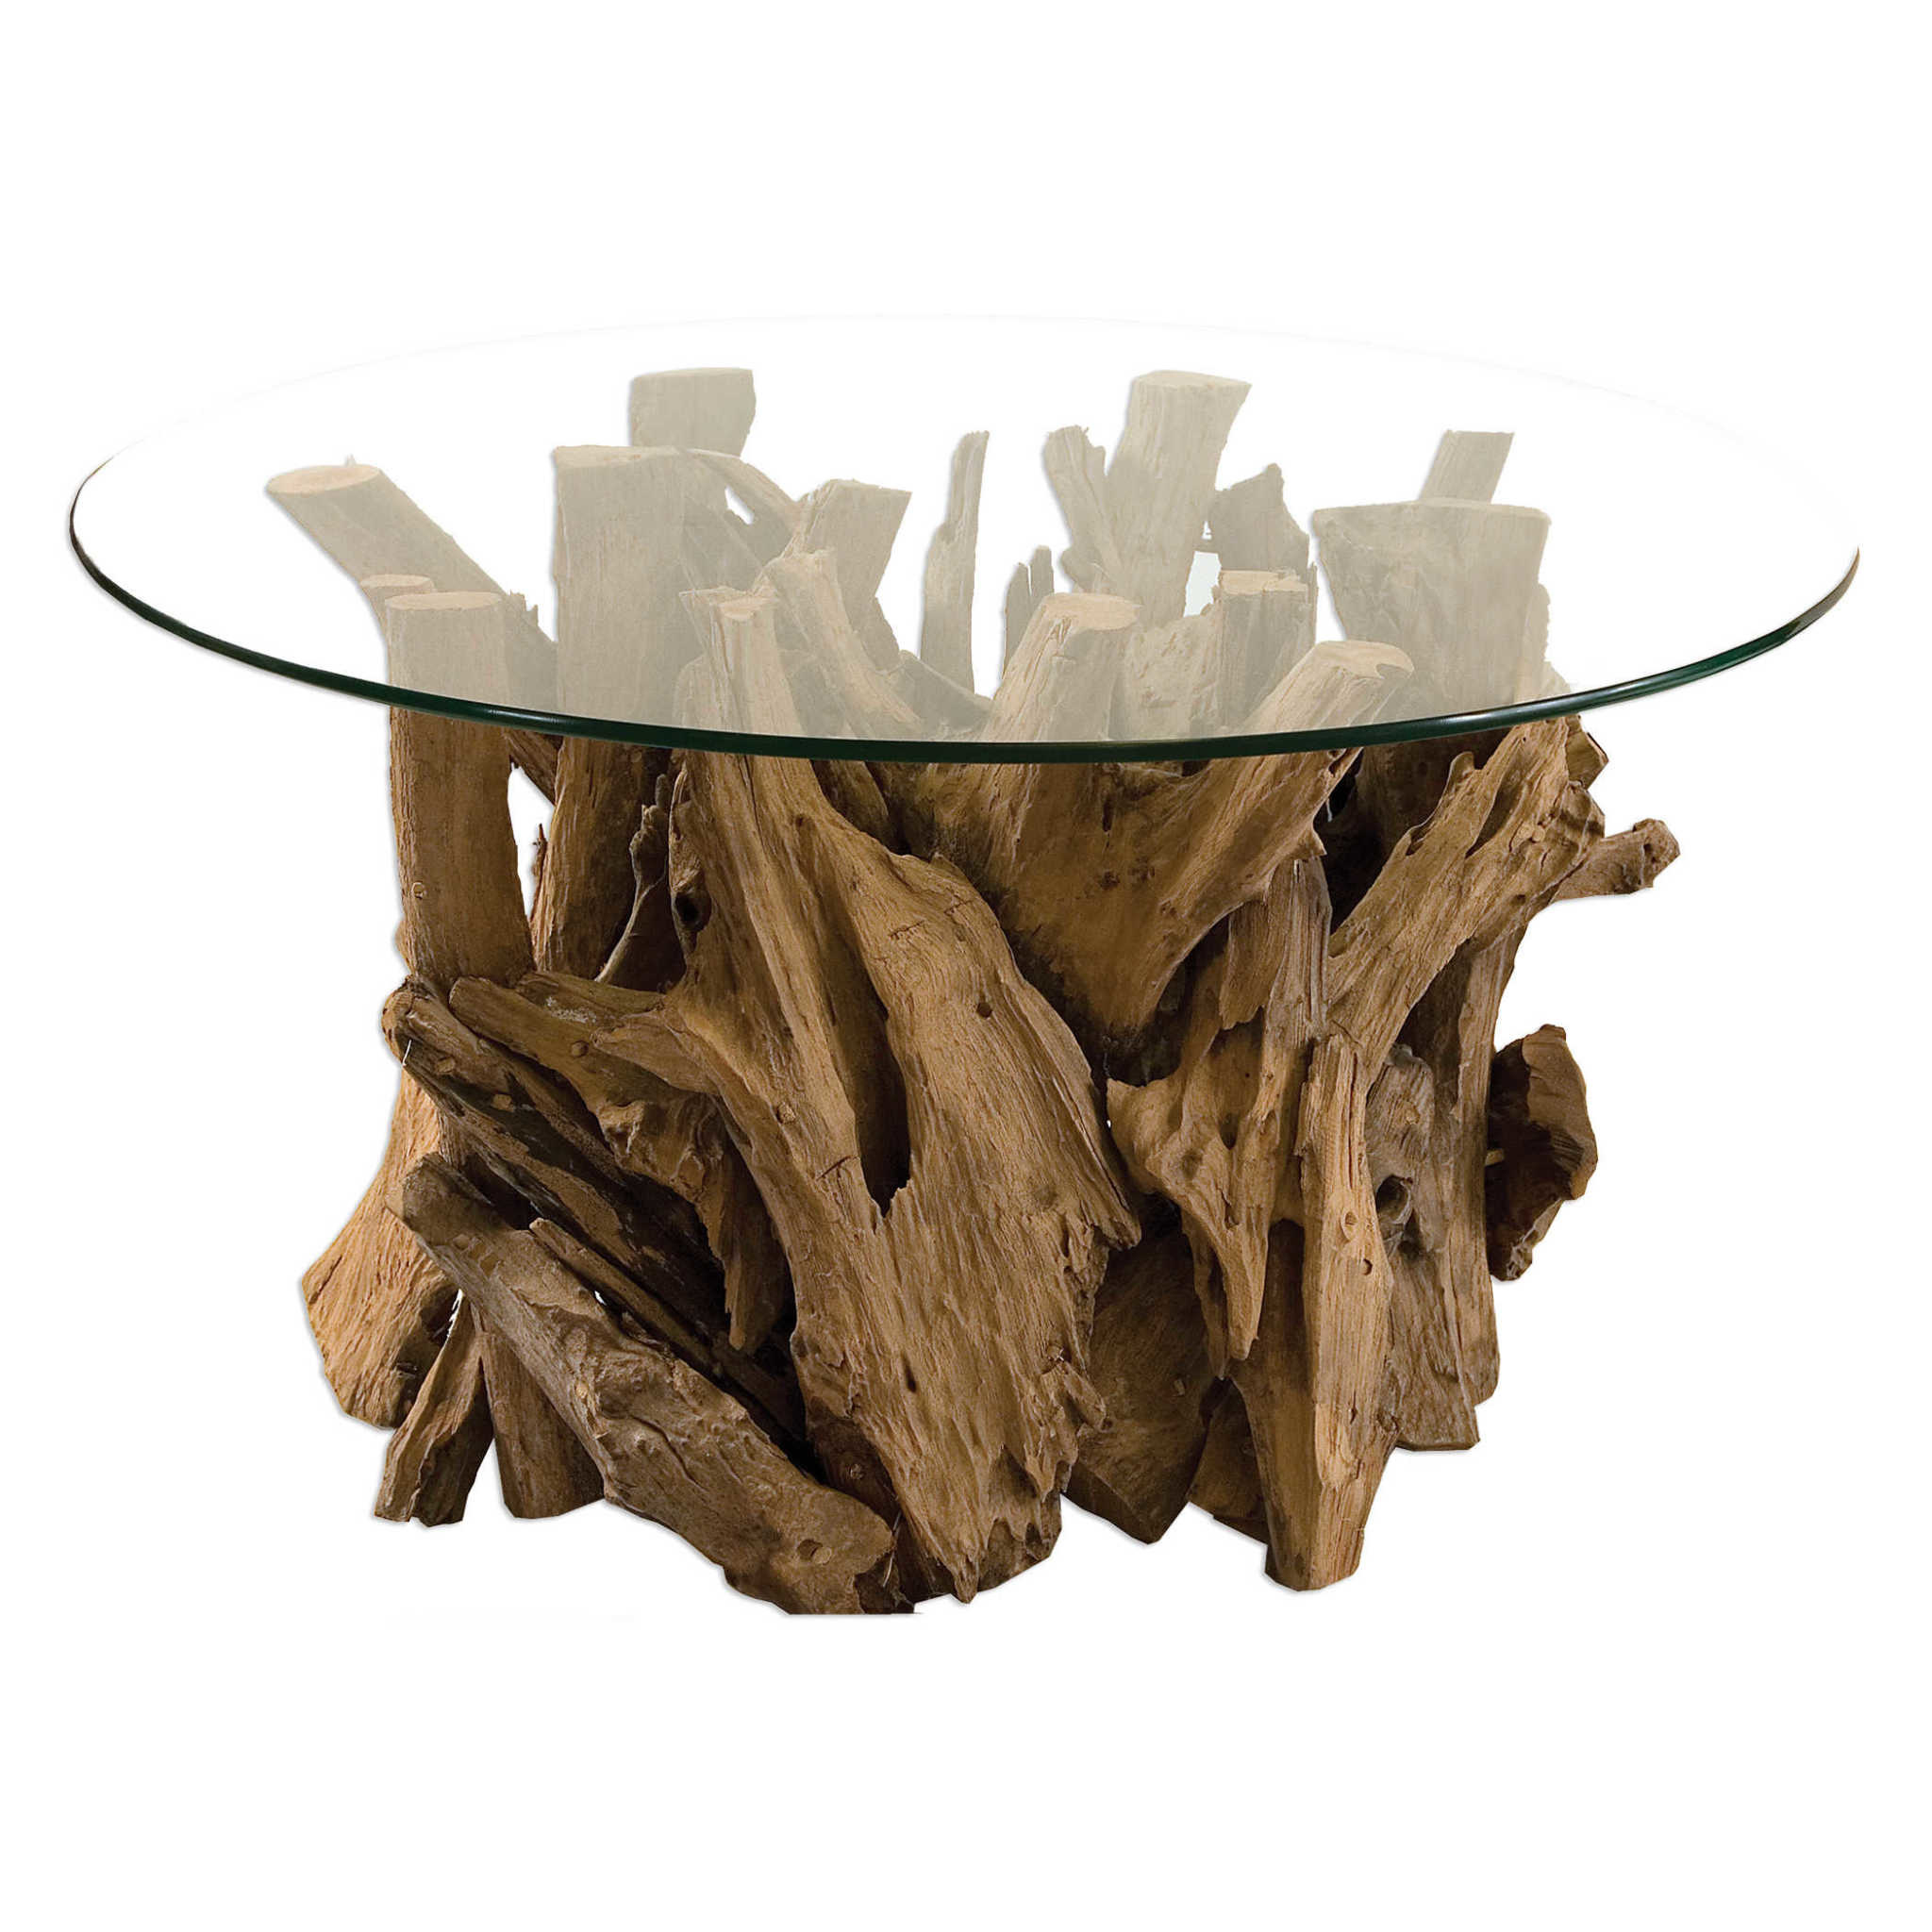 Driftwood Cocktail Table, 36 x 18 x 36 Furniture Available for Local Delivery or Pick Up